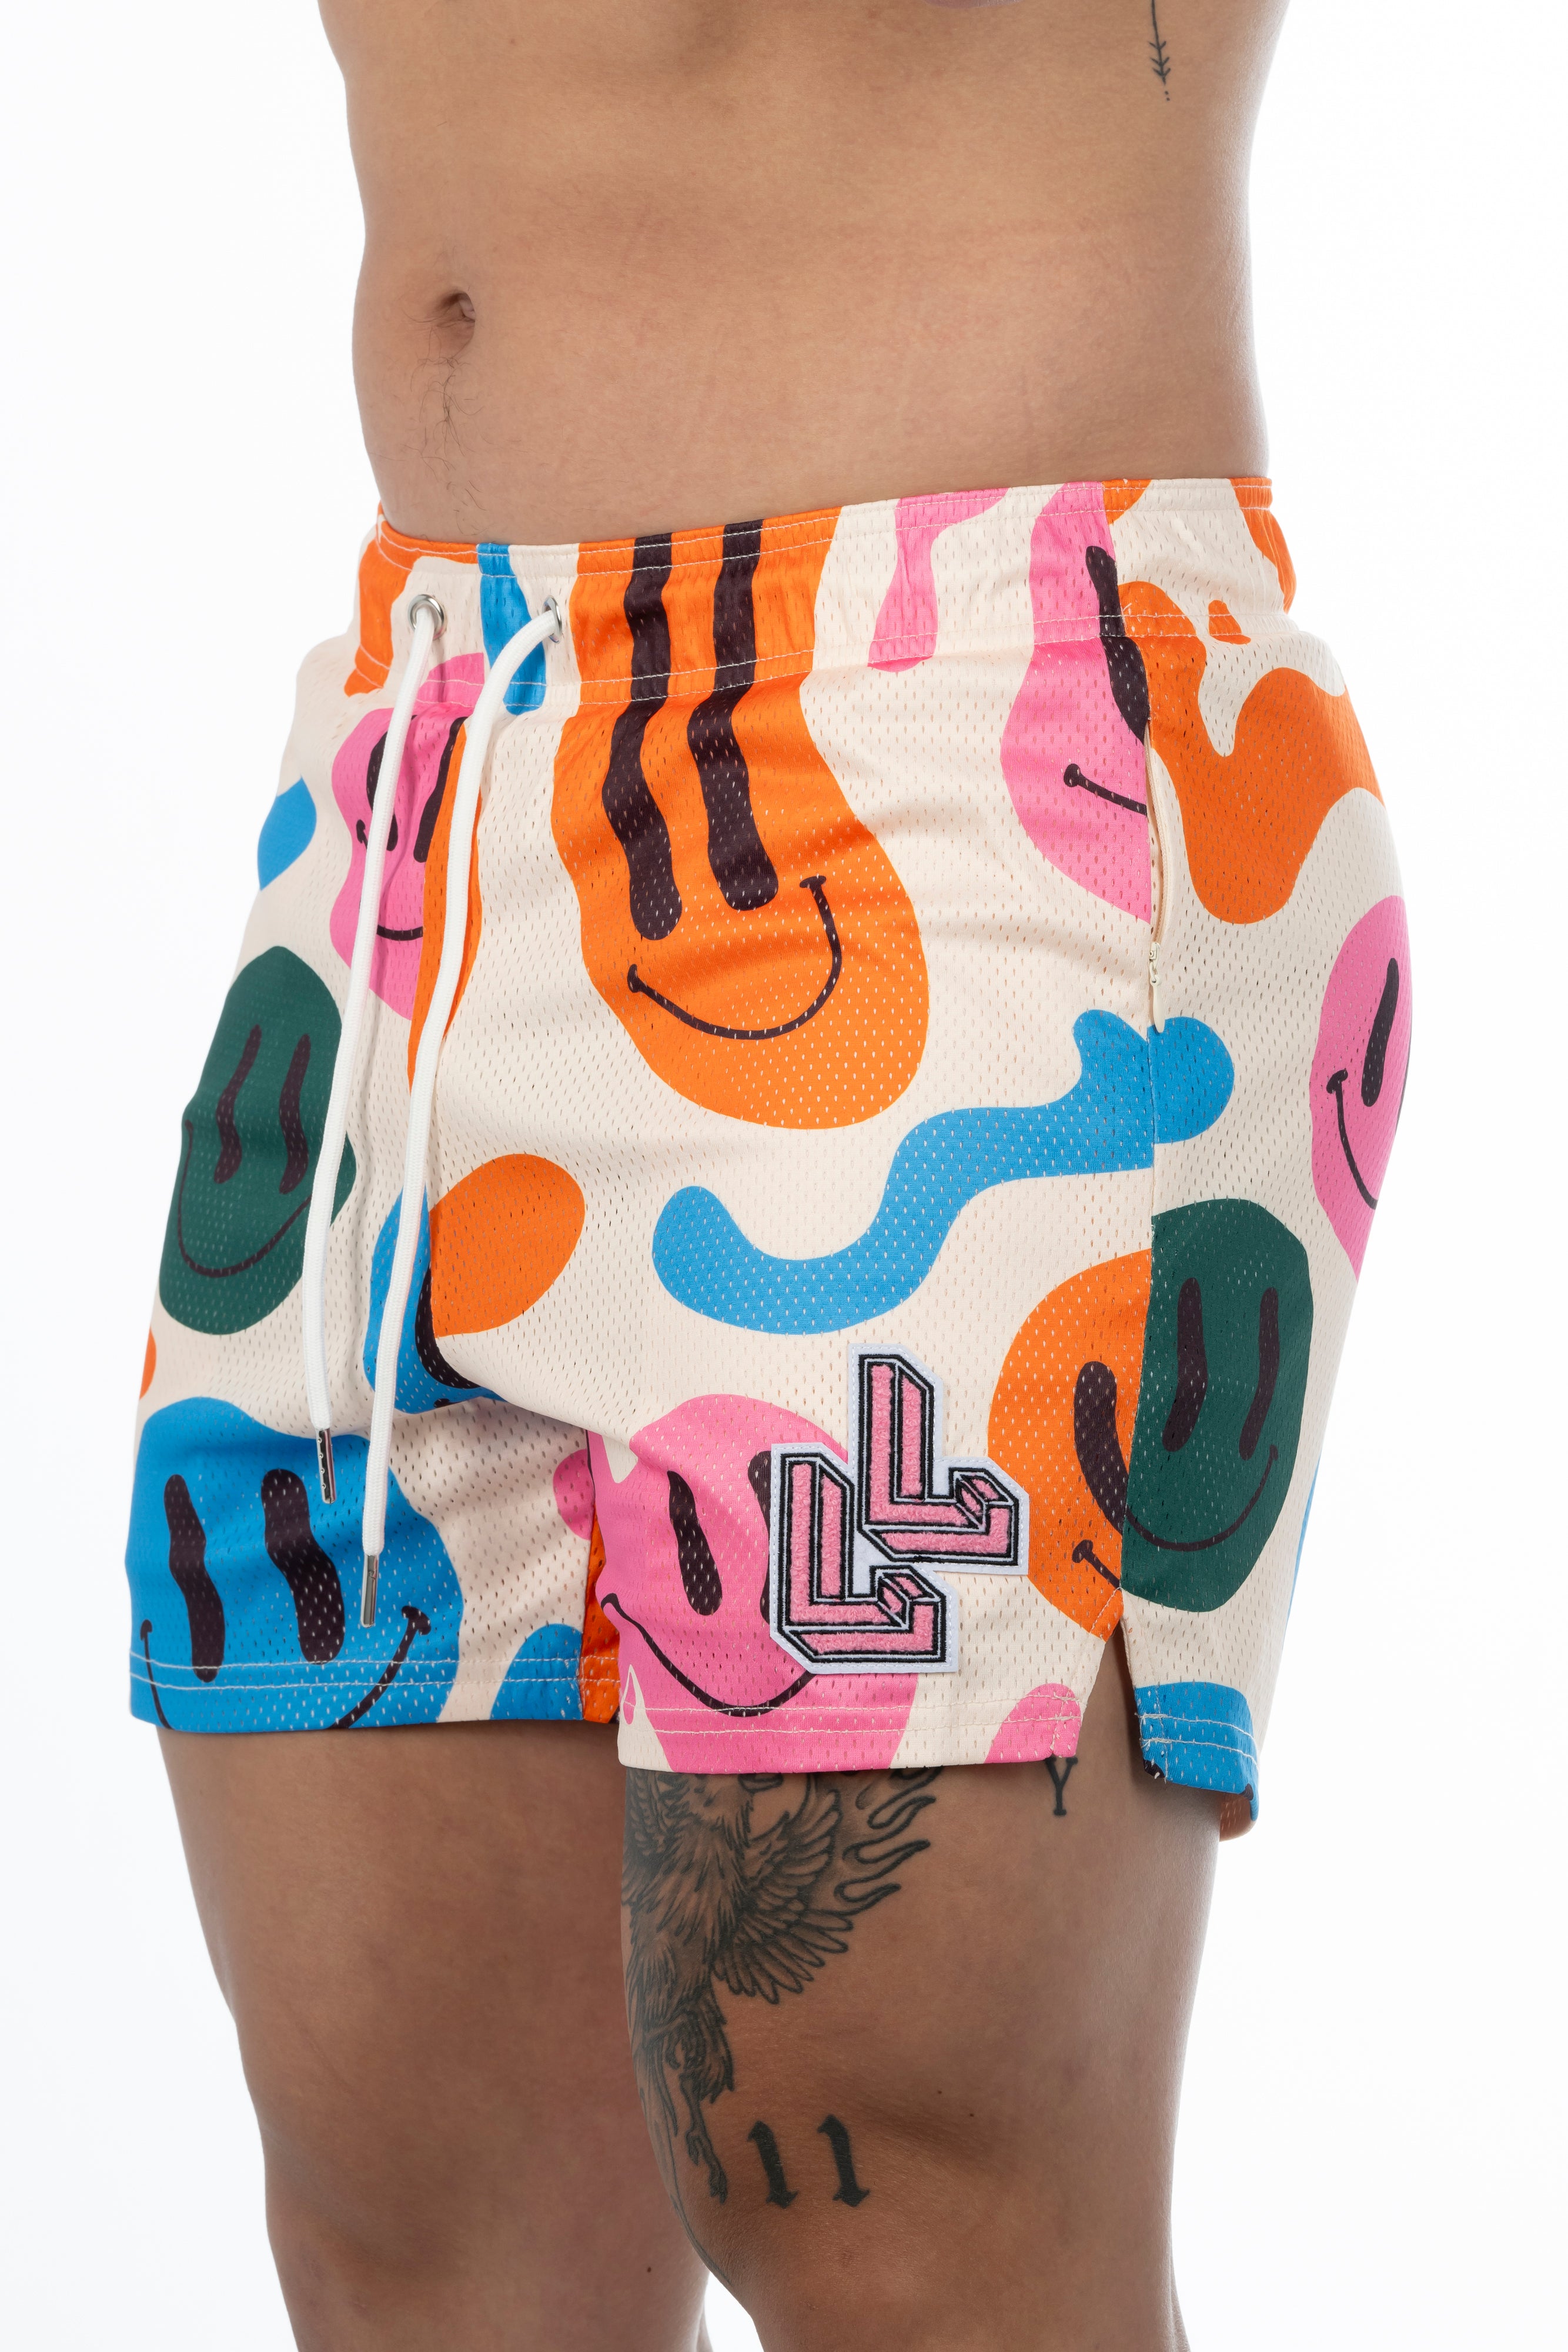 Psychedelic Smiley workout shorts